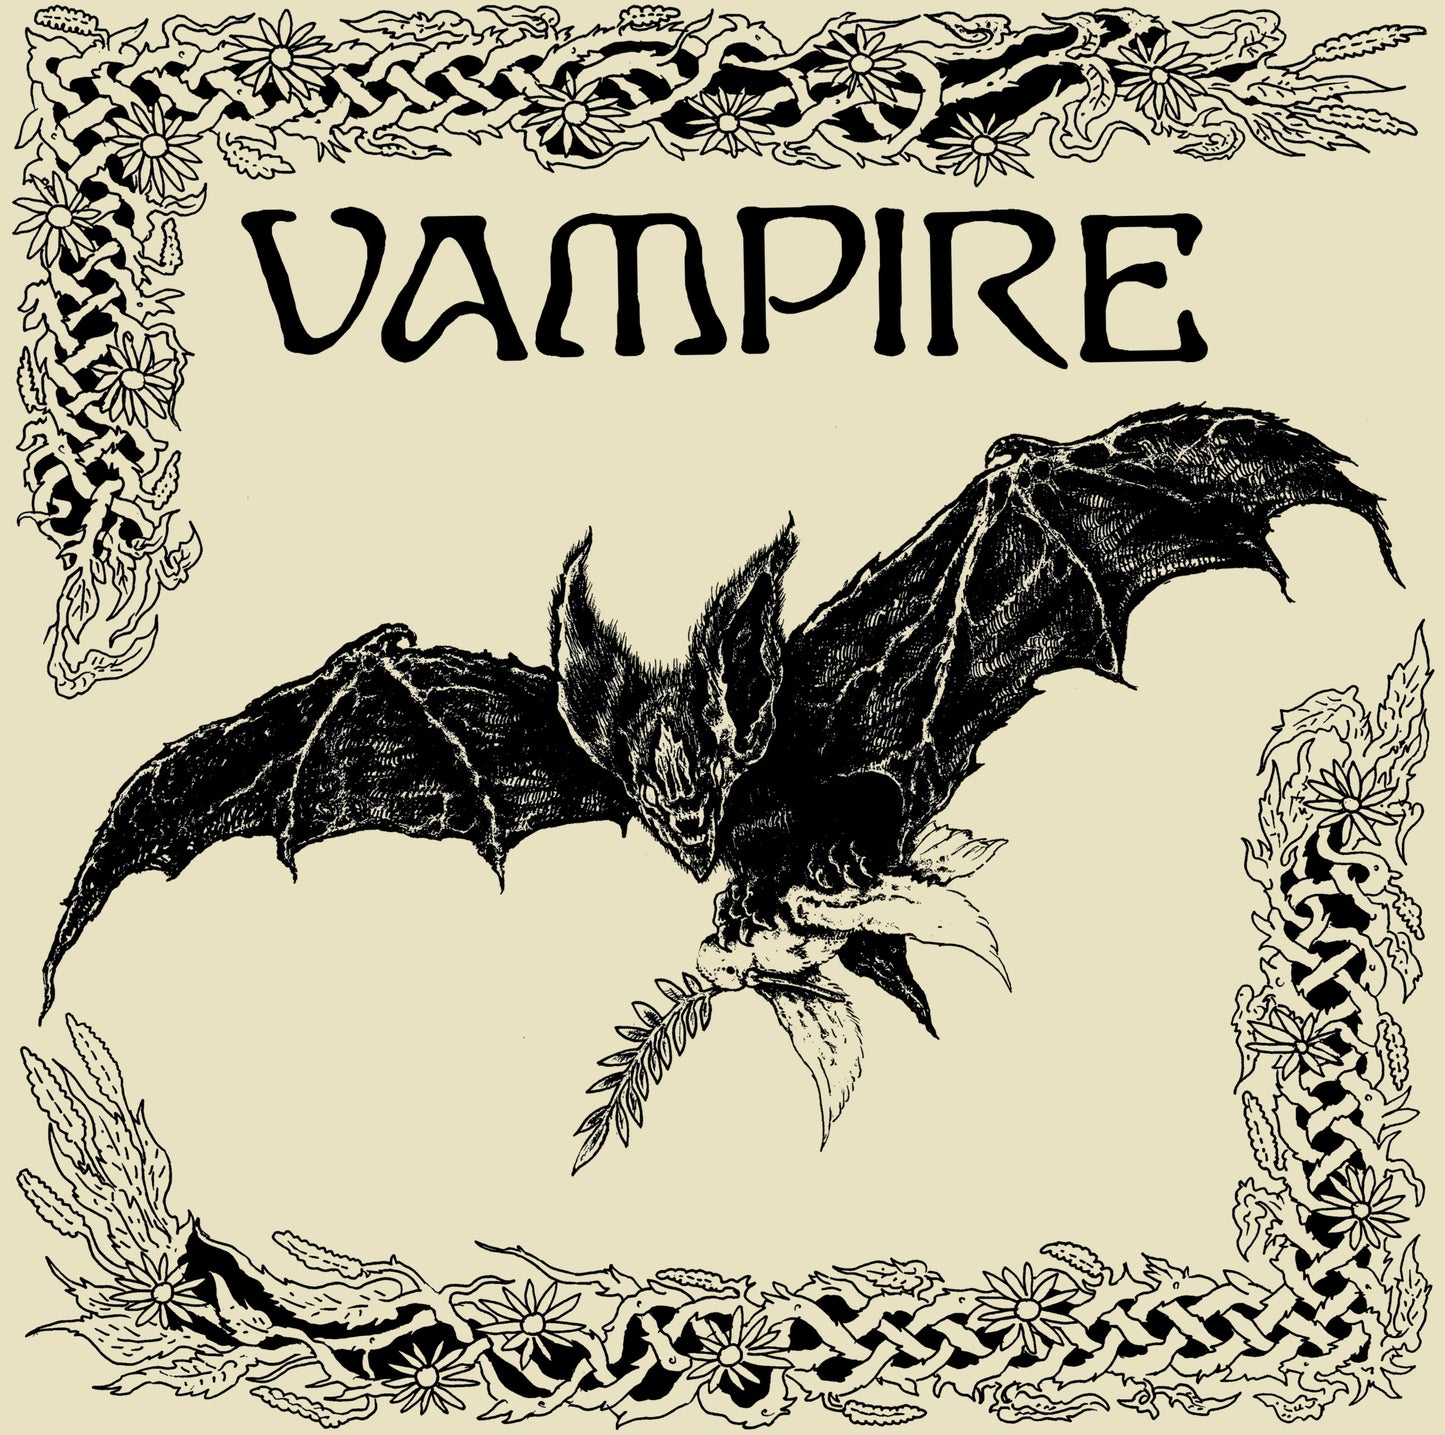 VAMPIRE - "WHAT SEEMS FOREVER CAN BE BROKEN" LP